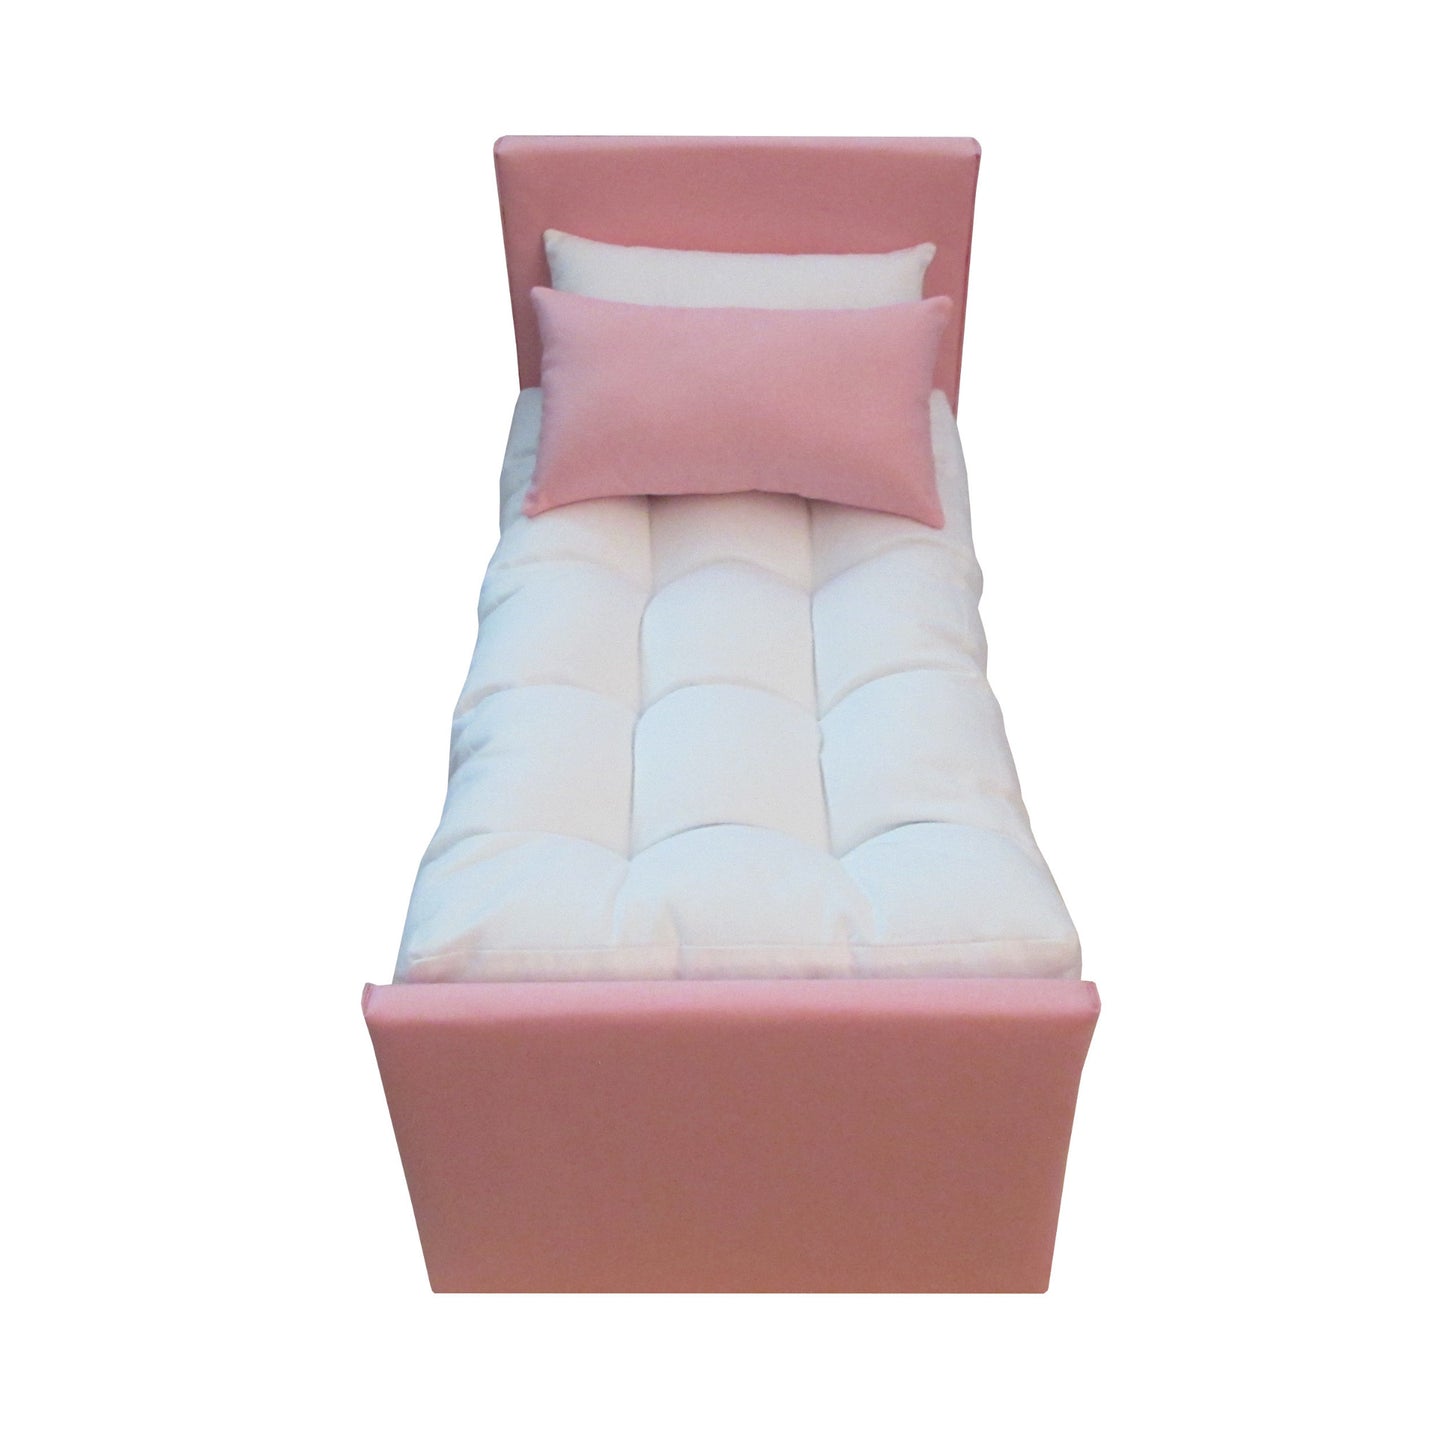 Upholstered Pink Trundle Bed Front View with Mattress and Pillows